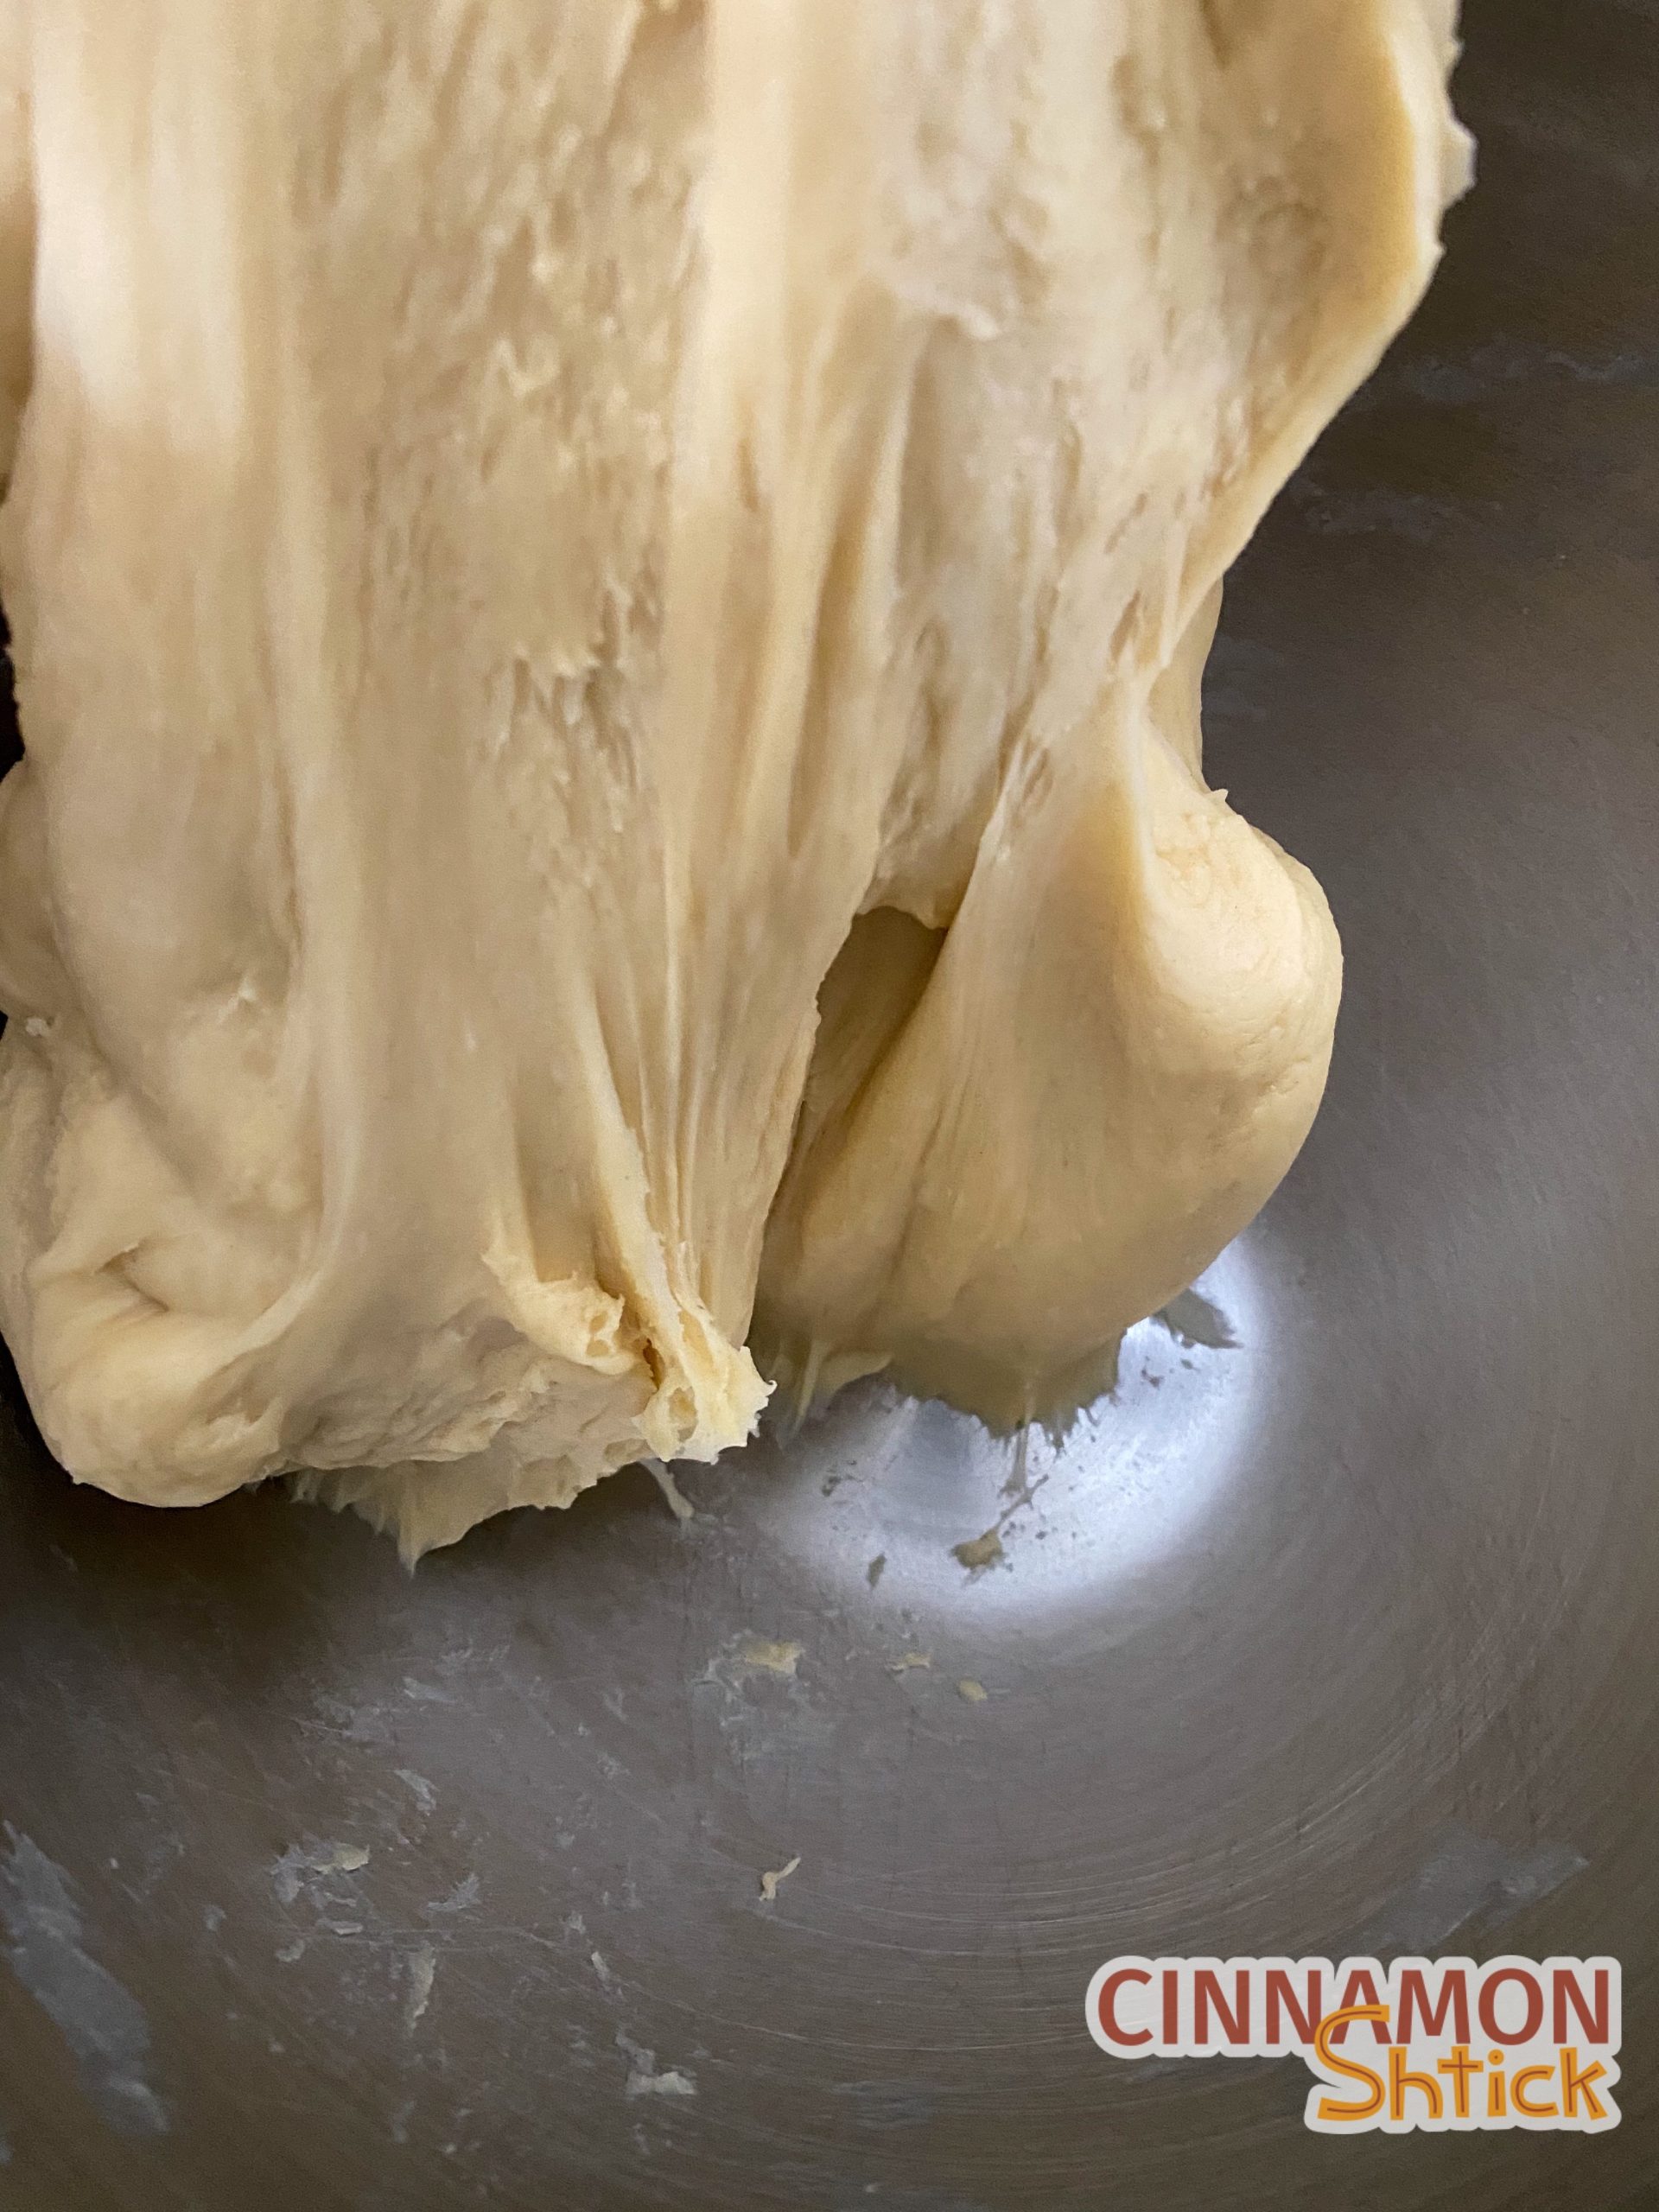 Dough after kneading, being lifted from the mixer bowl.